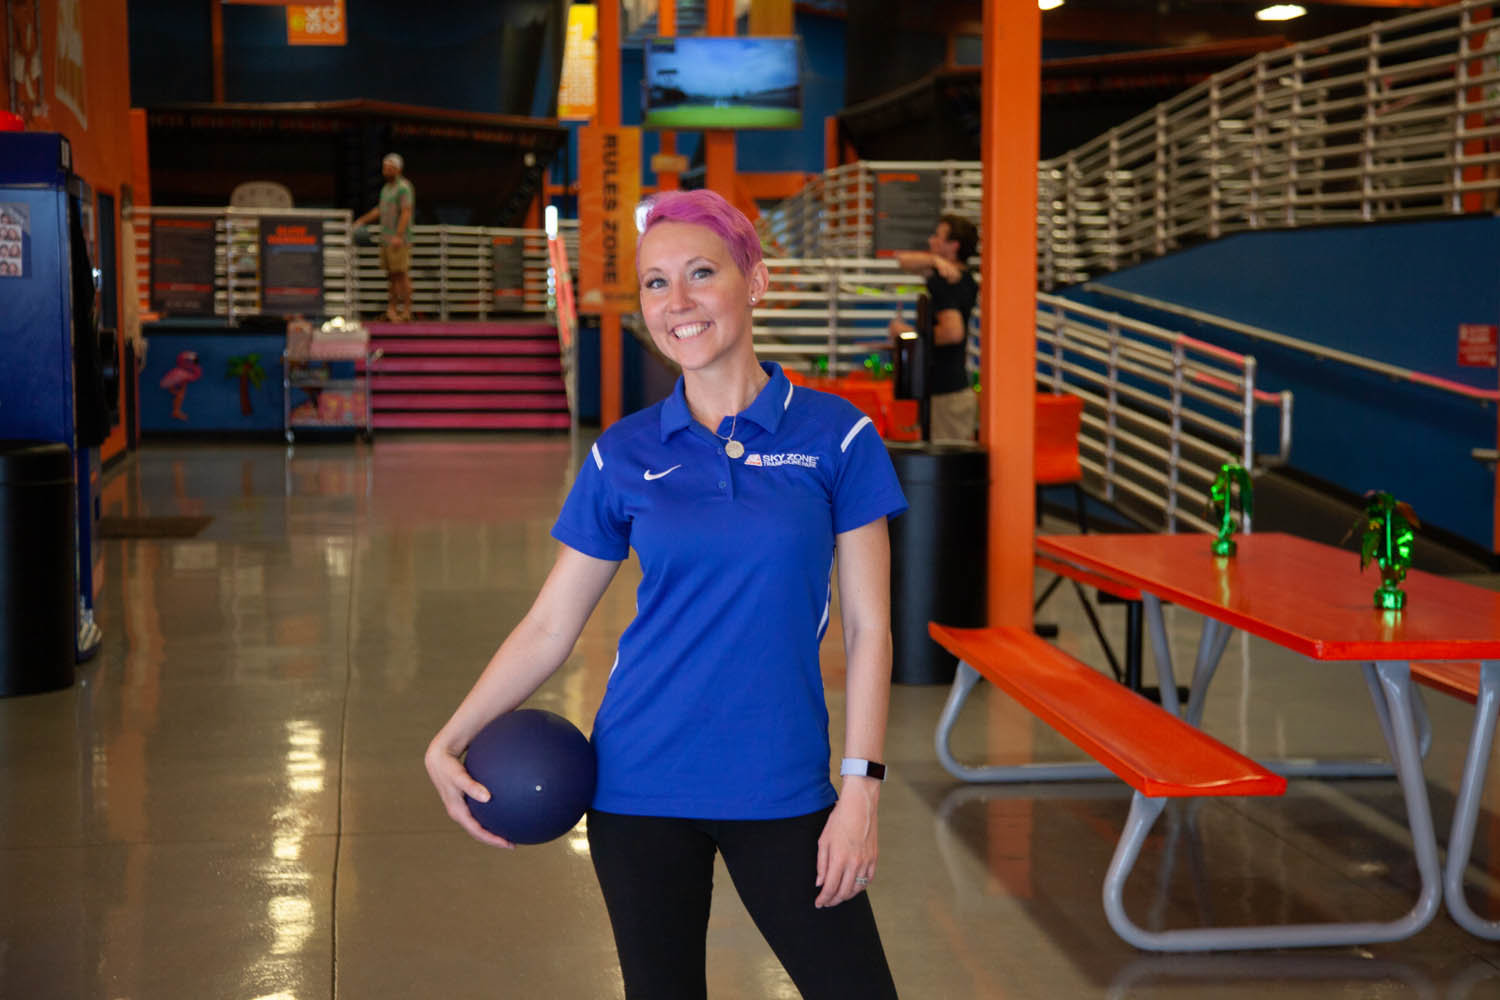 JUMPING SALES: Ashley Frazier-Osburn of Sky Zone Springfield says the trampoline park’s sales are up 12% this year.